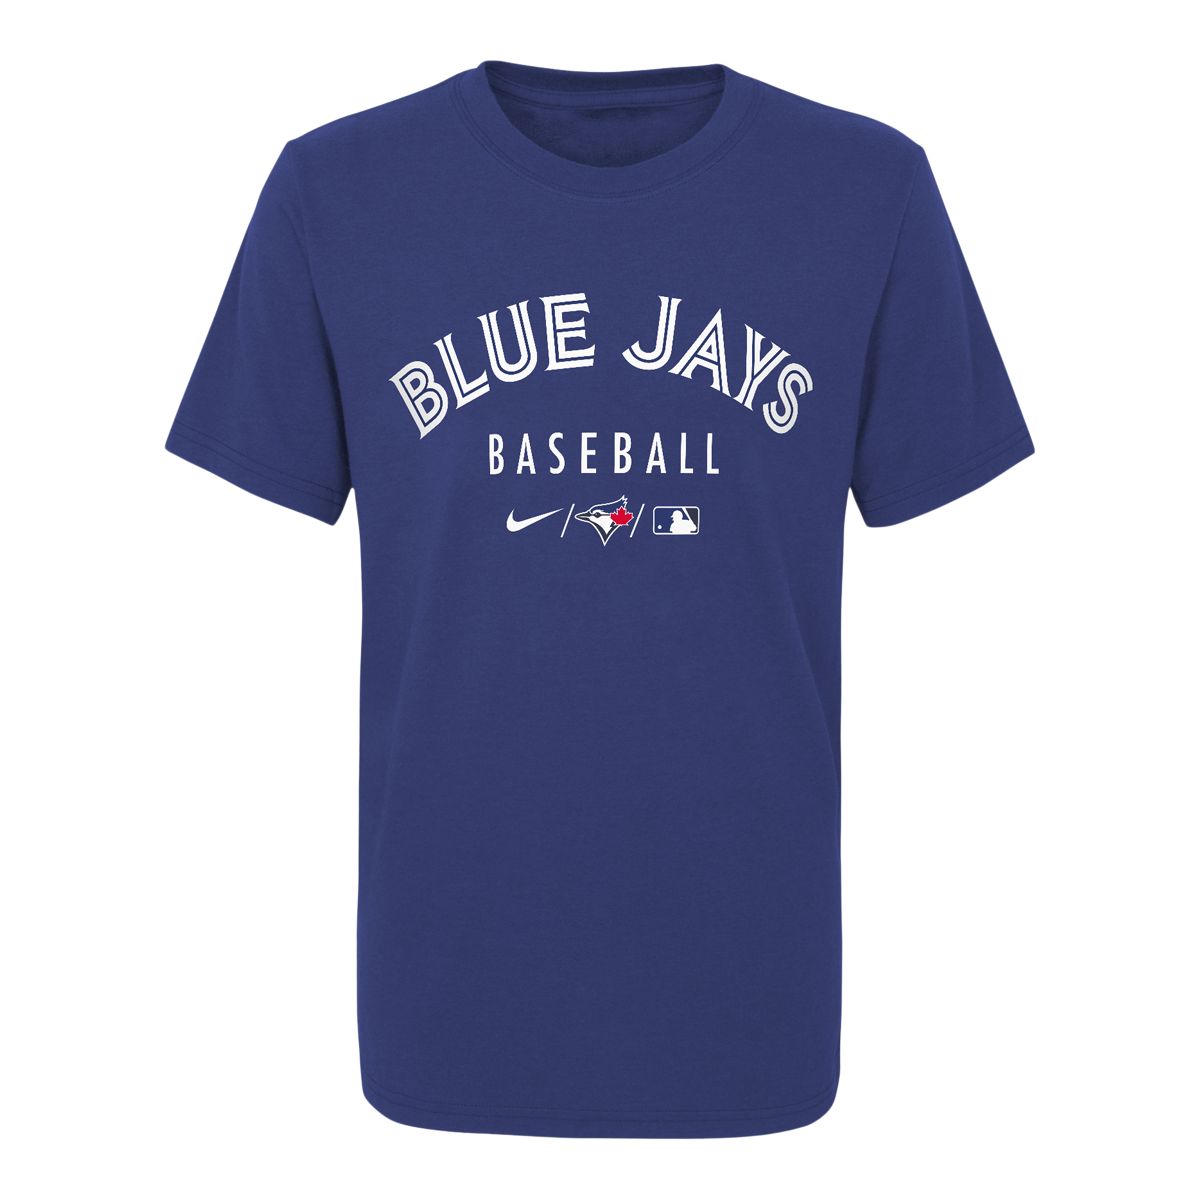 Toronto Blue Jays on X: The boys have the Power of the Pants